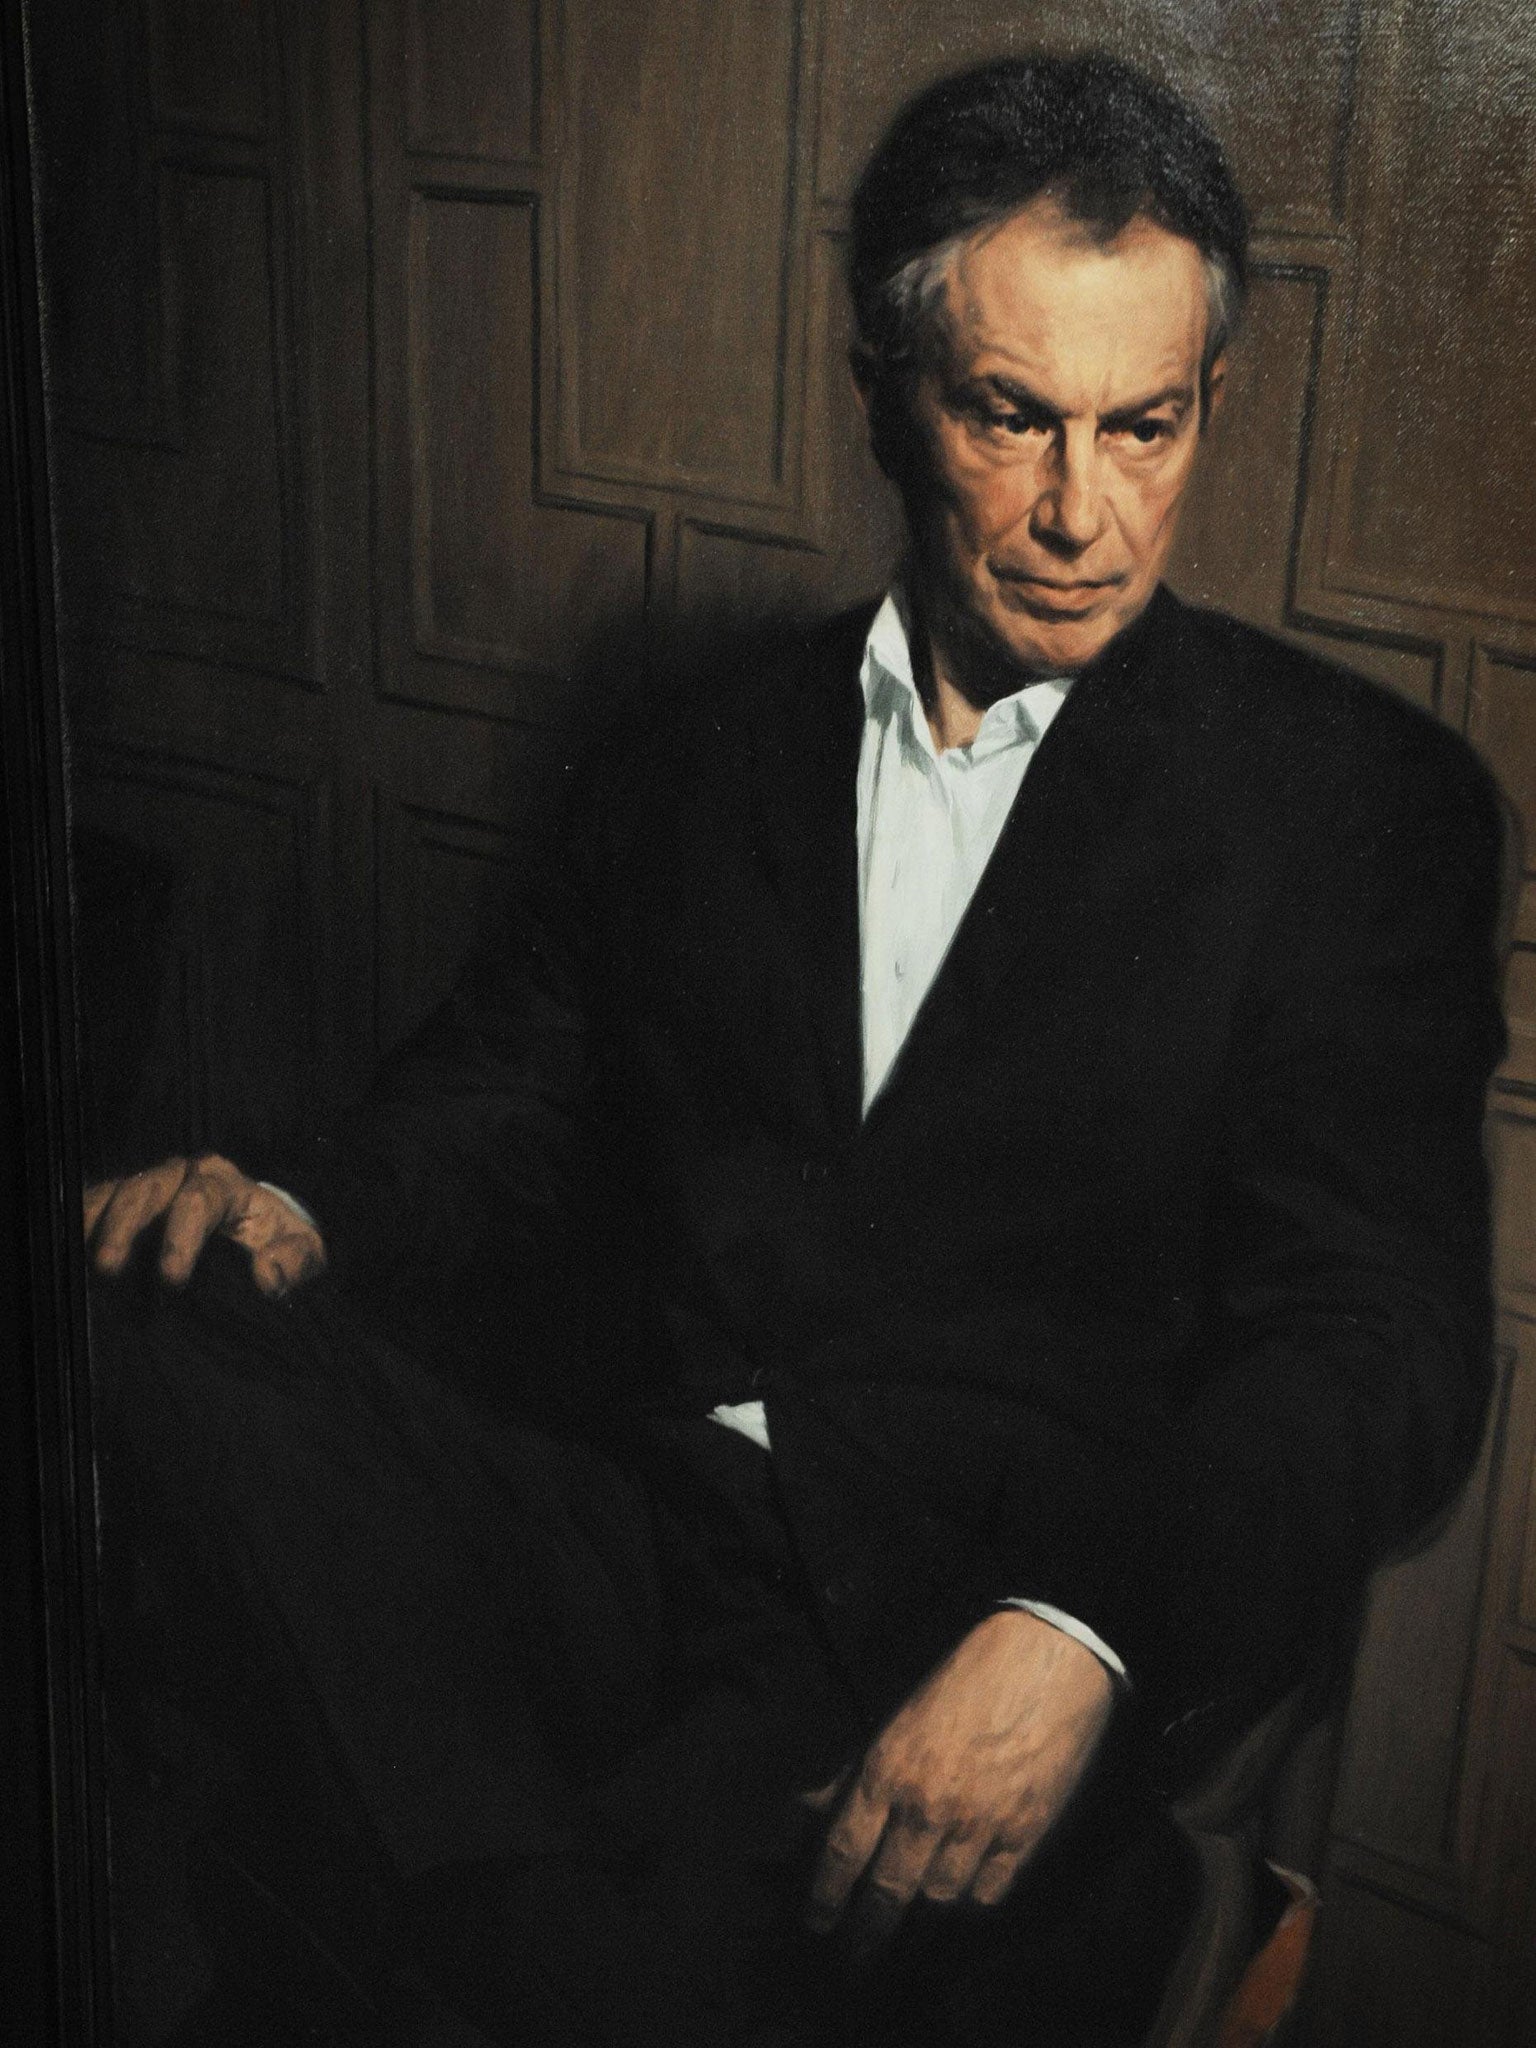 A portrait of former Prime Minister Tony Blair by Phil Hale was hung in Westminster in 2008